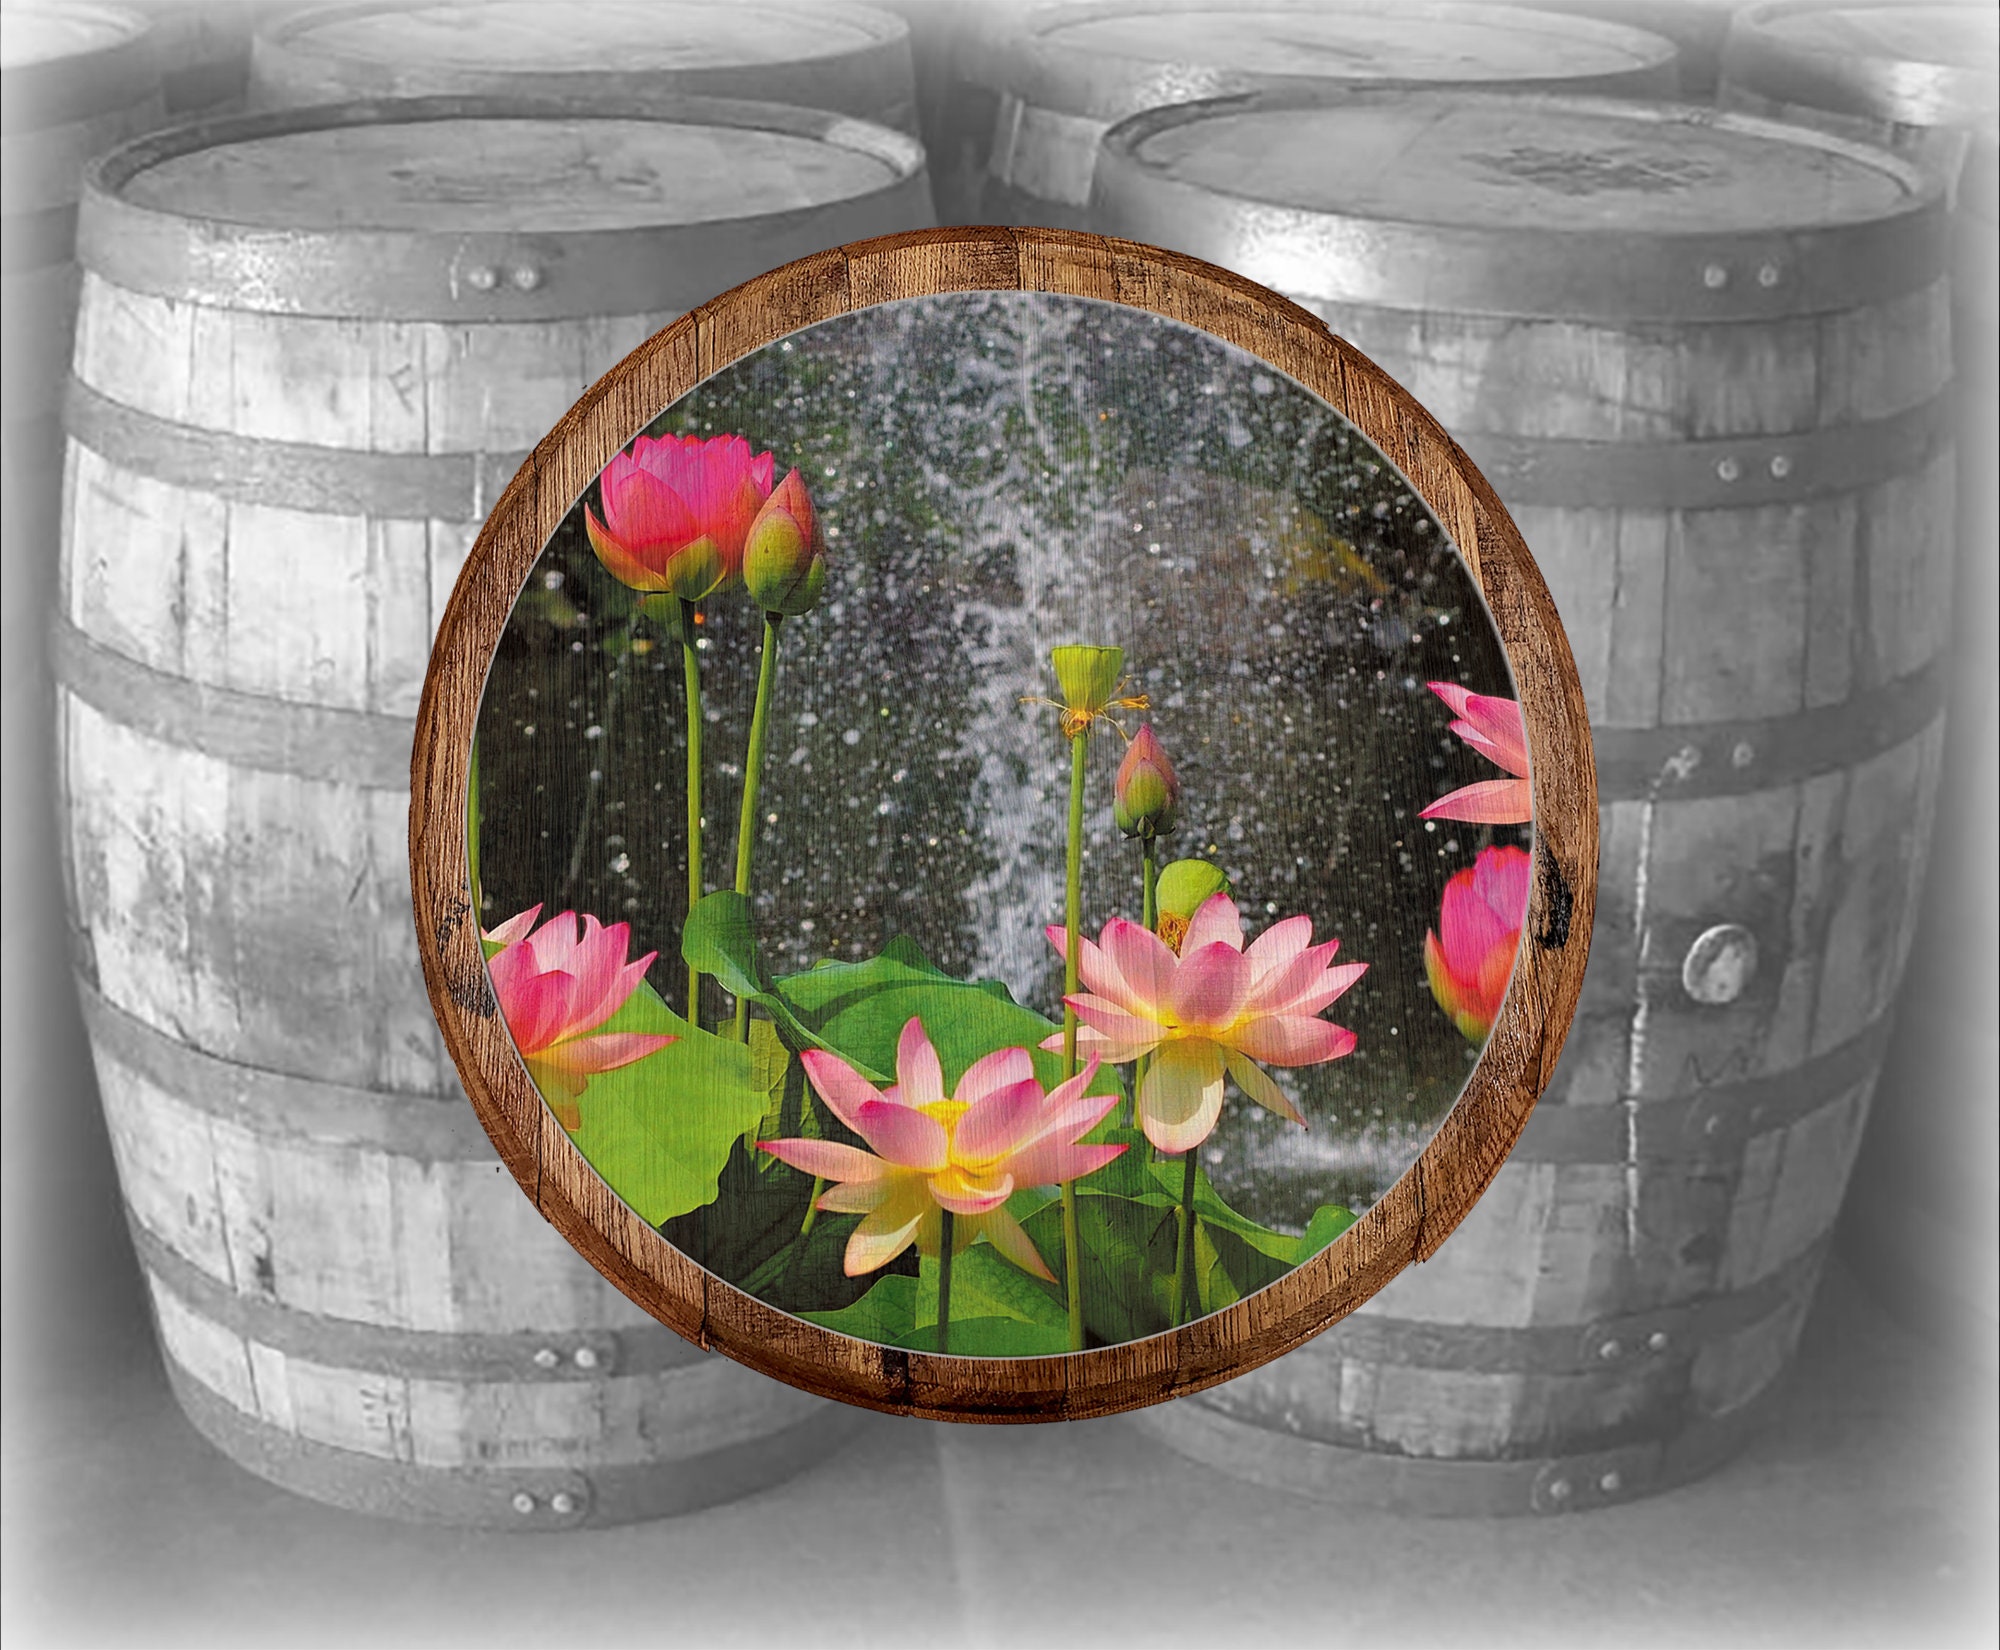 Details about   Whiskey Barrel Head Pink Lotus Blossom Waterfall Rain Flowers Décor Wall Art